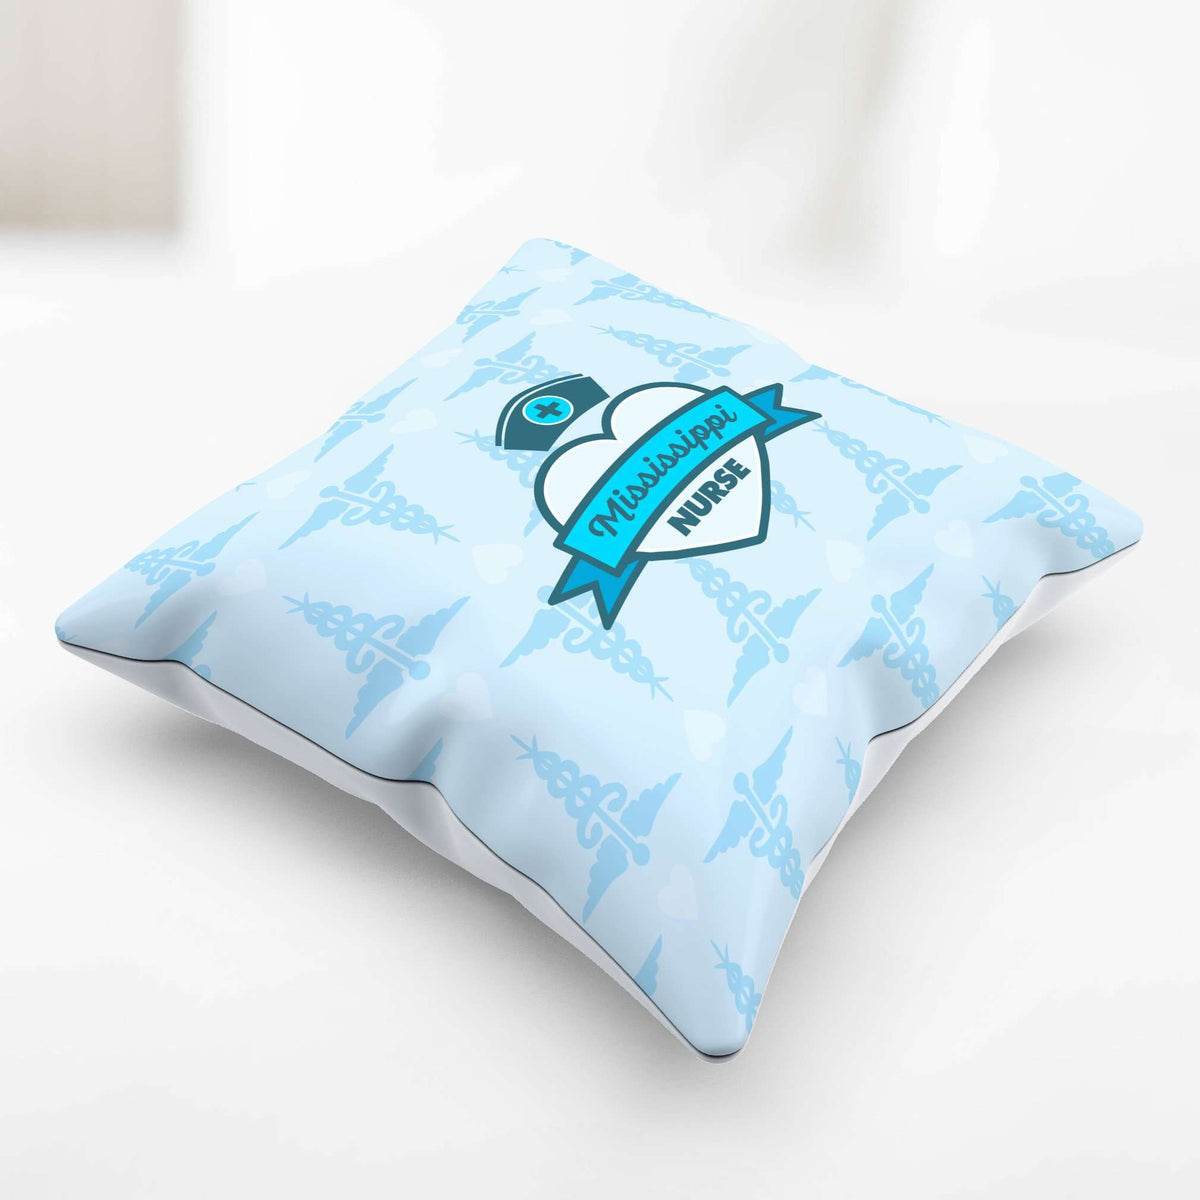 Designs by MyUtopia Shout Out:Mississippi Nurse Blue Pillowcase